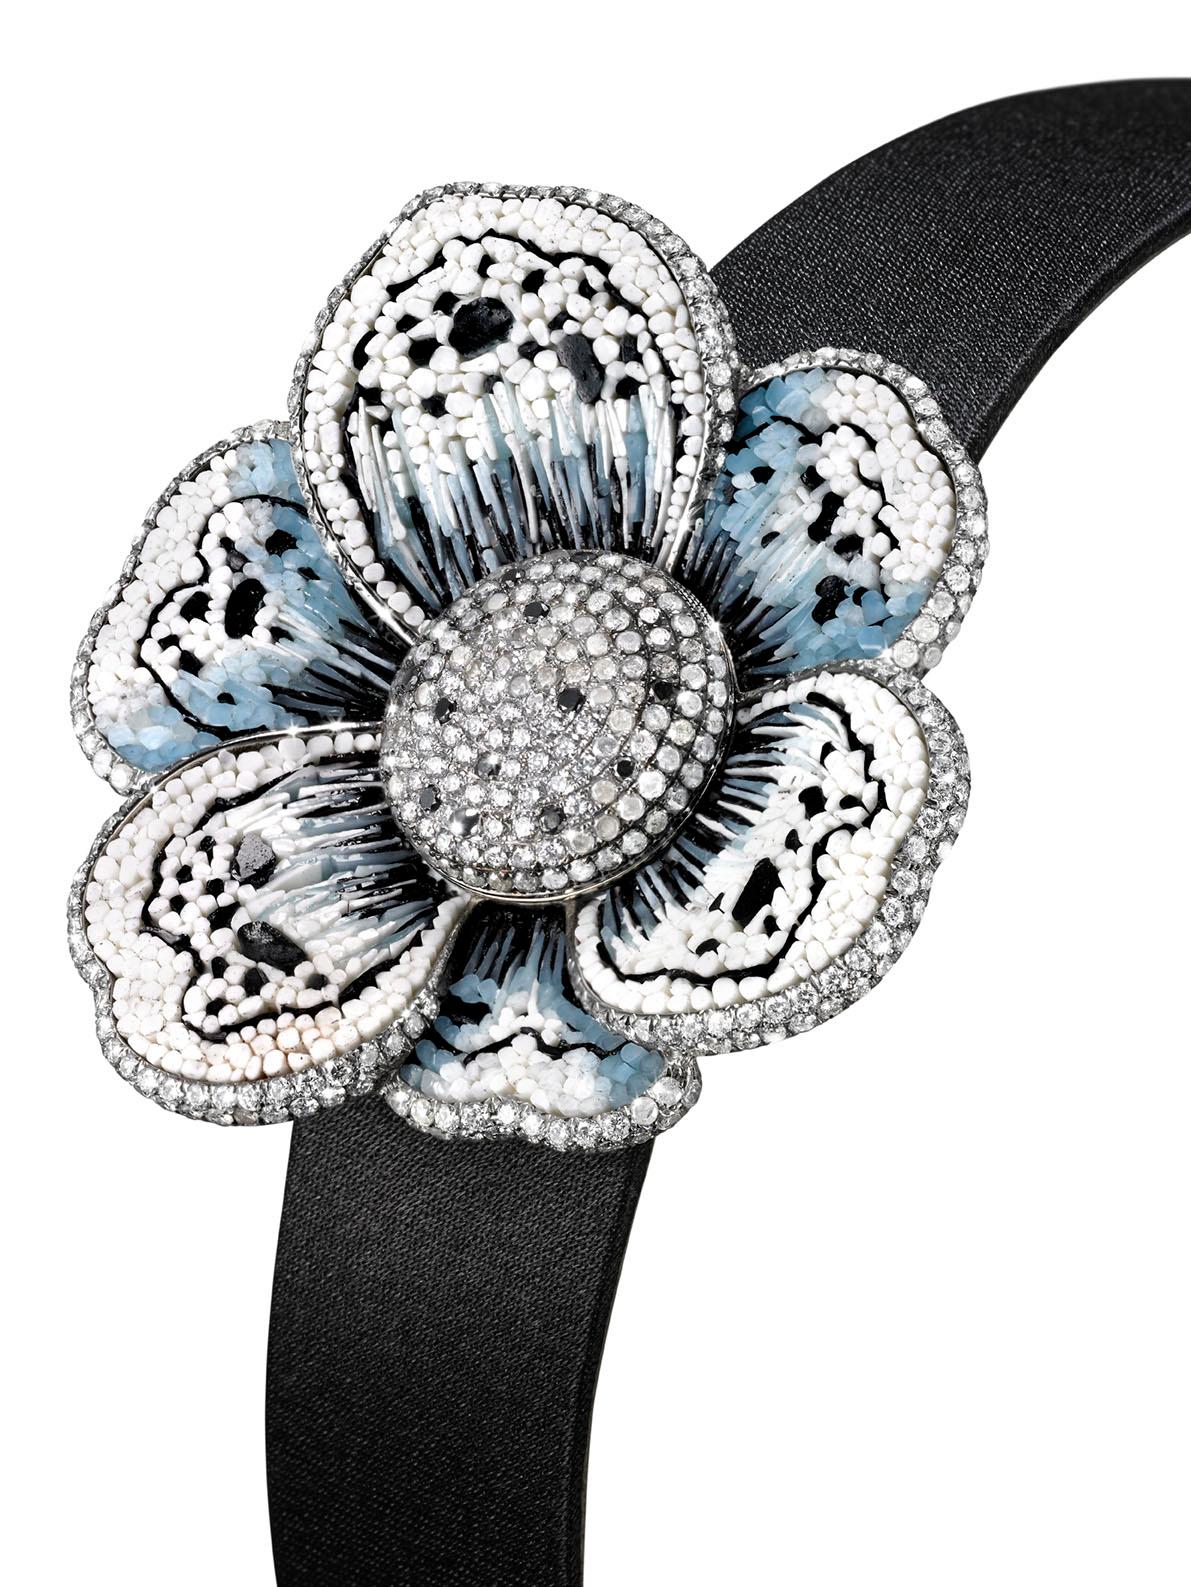 Contemporary Watch White Gold White Black and Ice Diamonds Satin Strap Decorated Micromosaic For Sale